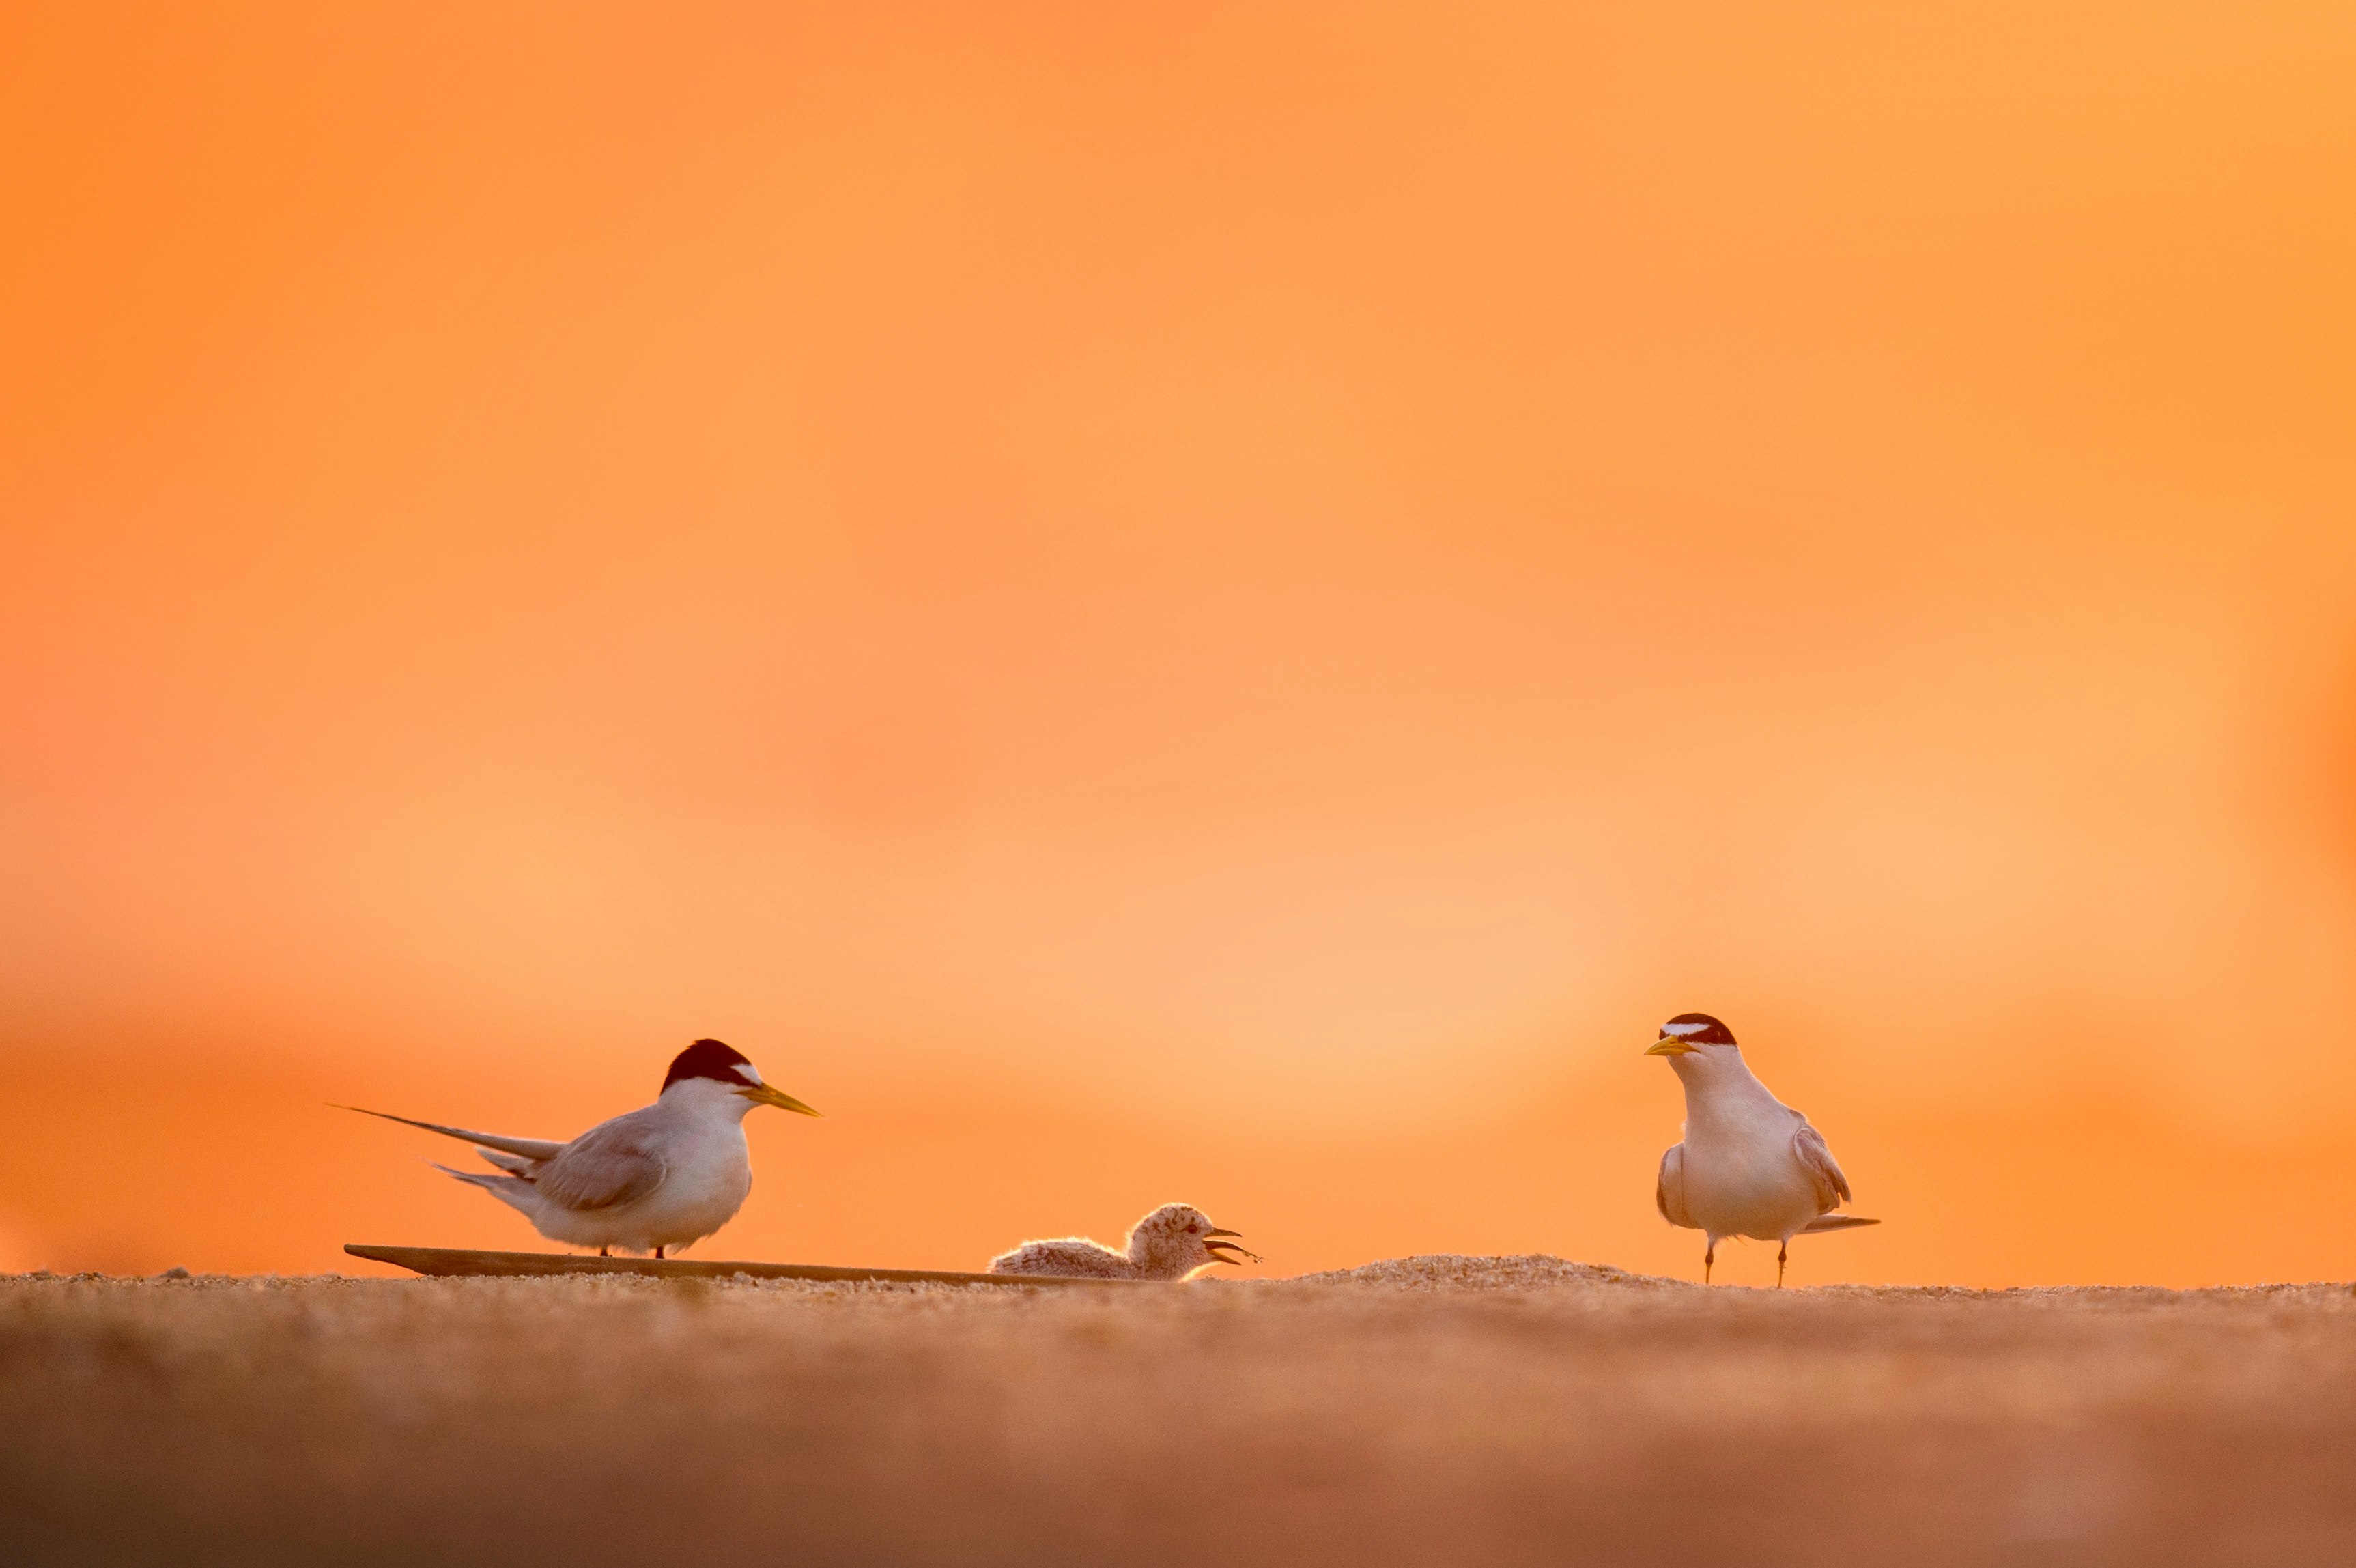 close-up photograph of two white birds